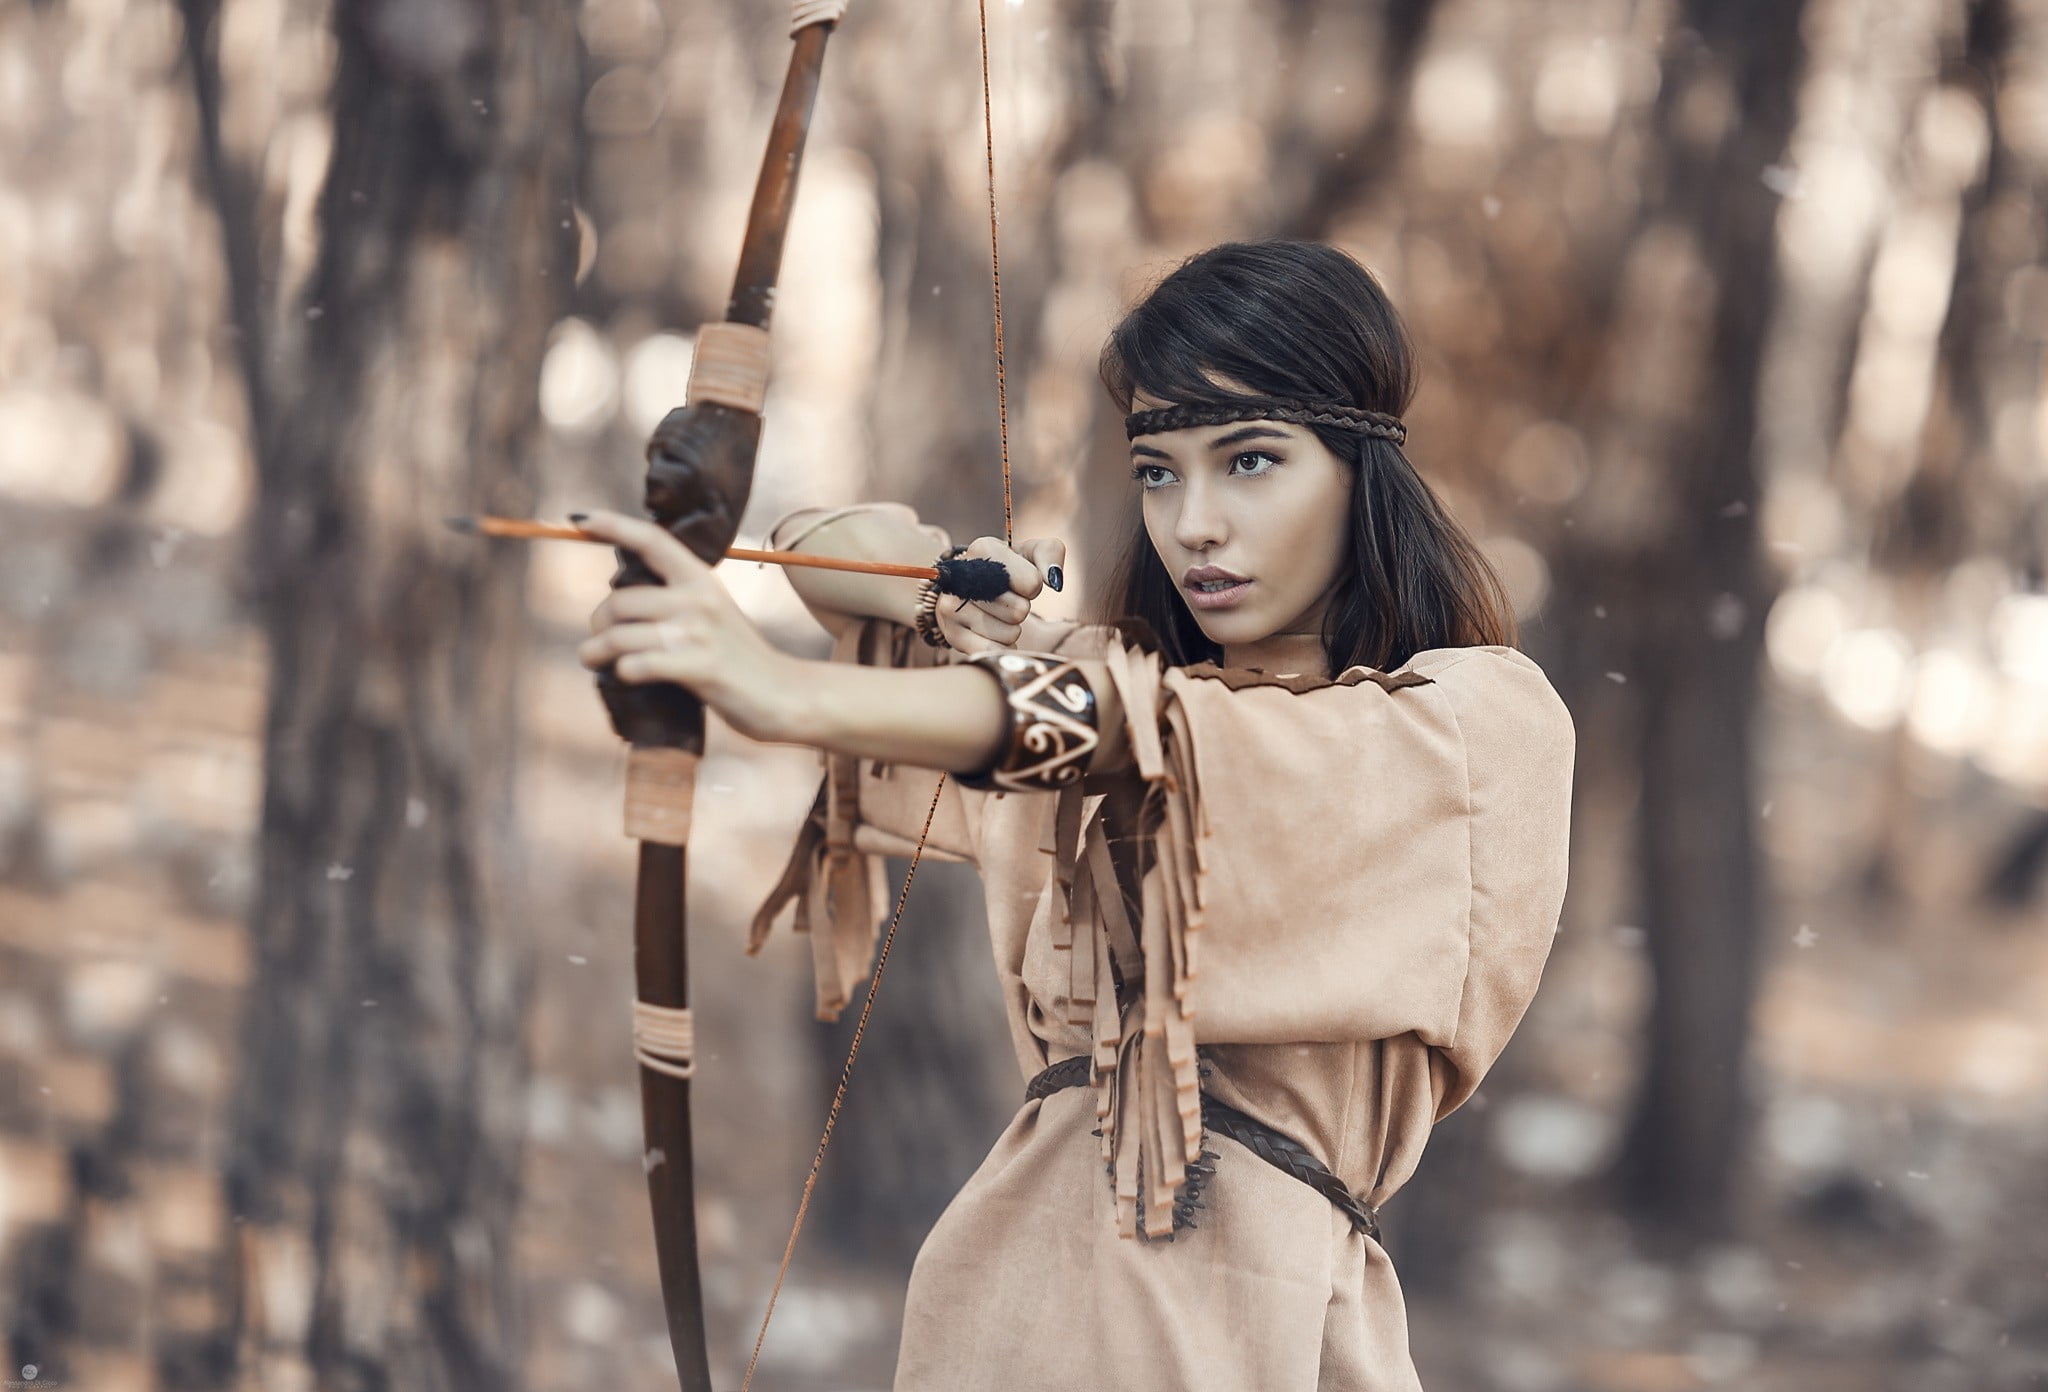 women, photography, bow and arrow, archery, one person, young adult